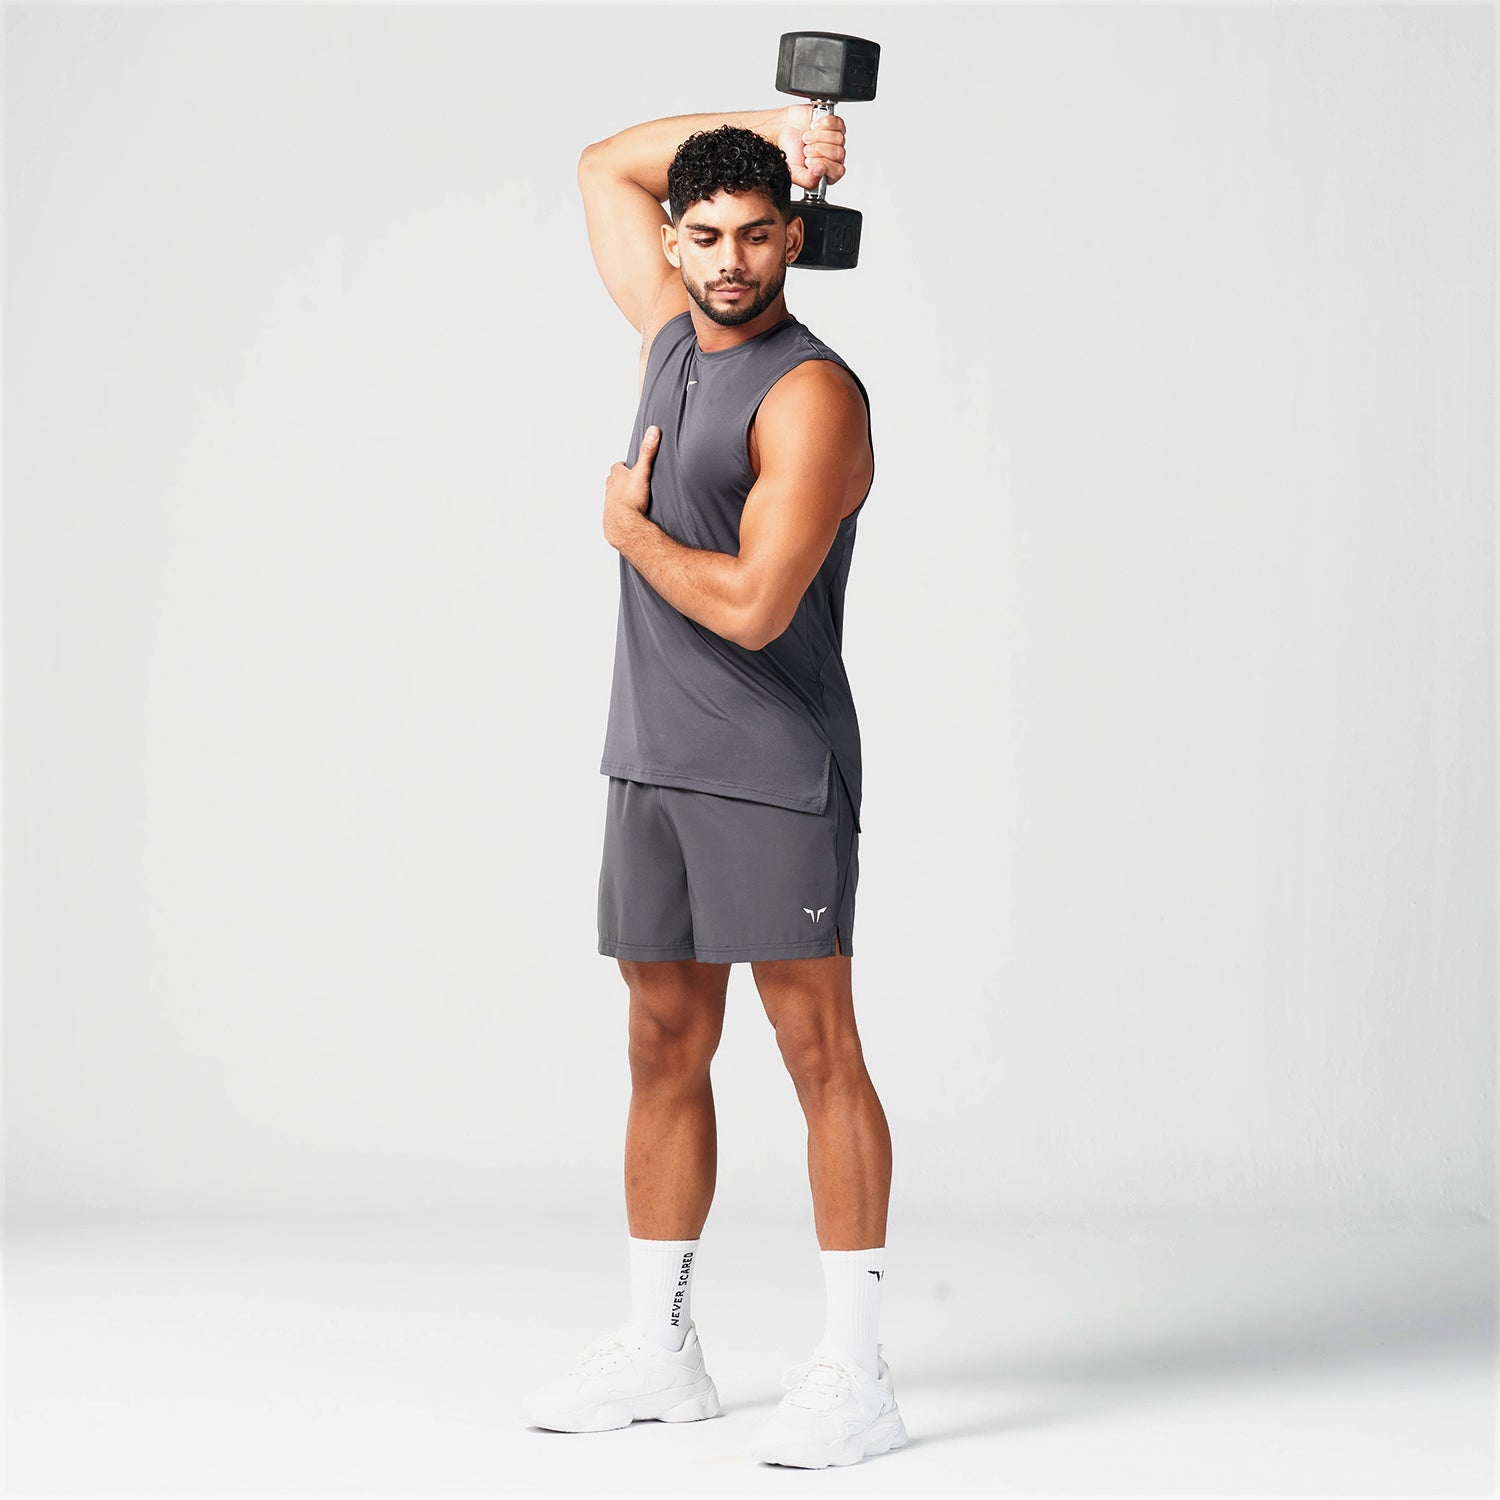 squatwolf-gym-wear-essential-gym-tank-charcoal-workout-tank-tops-for-men